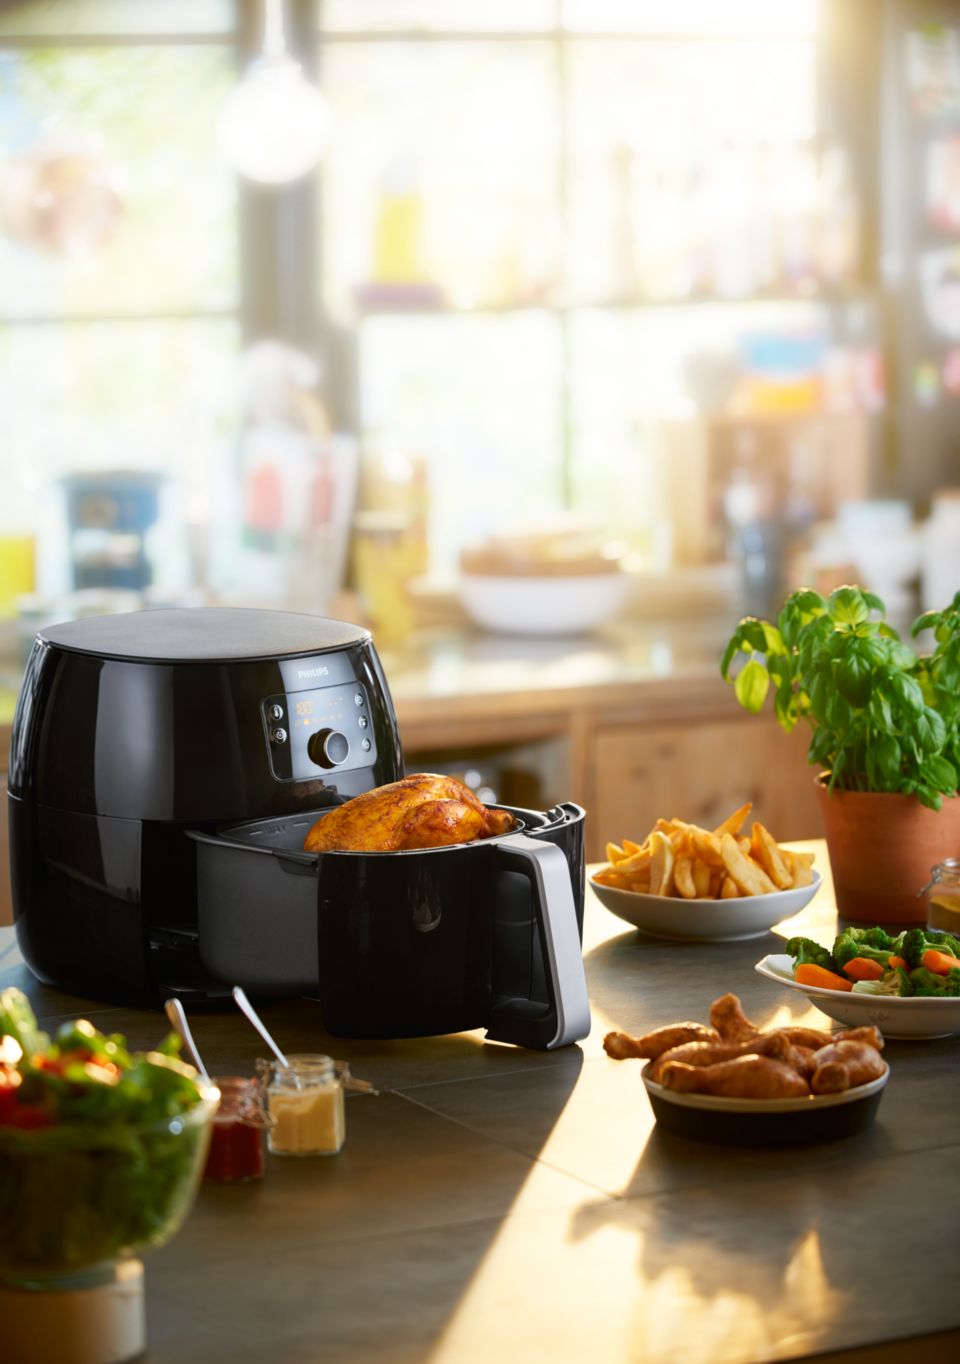 Premium Premium Airfryer XXL with Fat Removal Technology HD9630/96